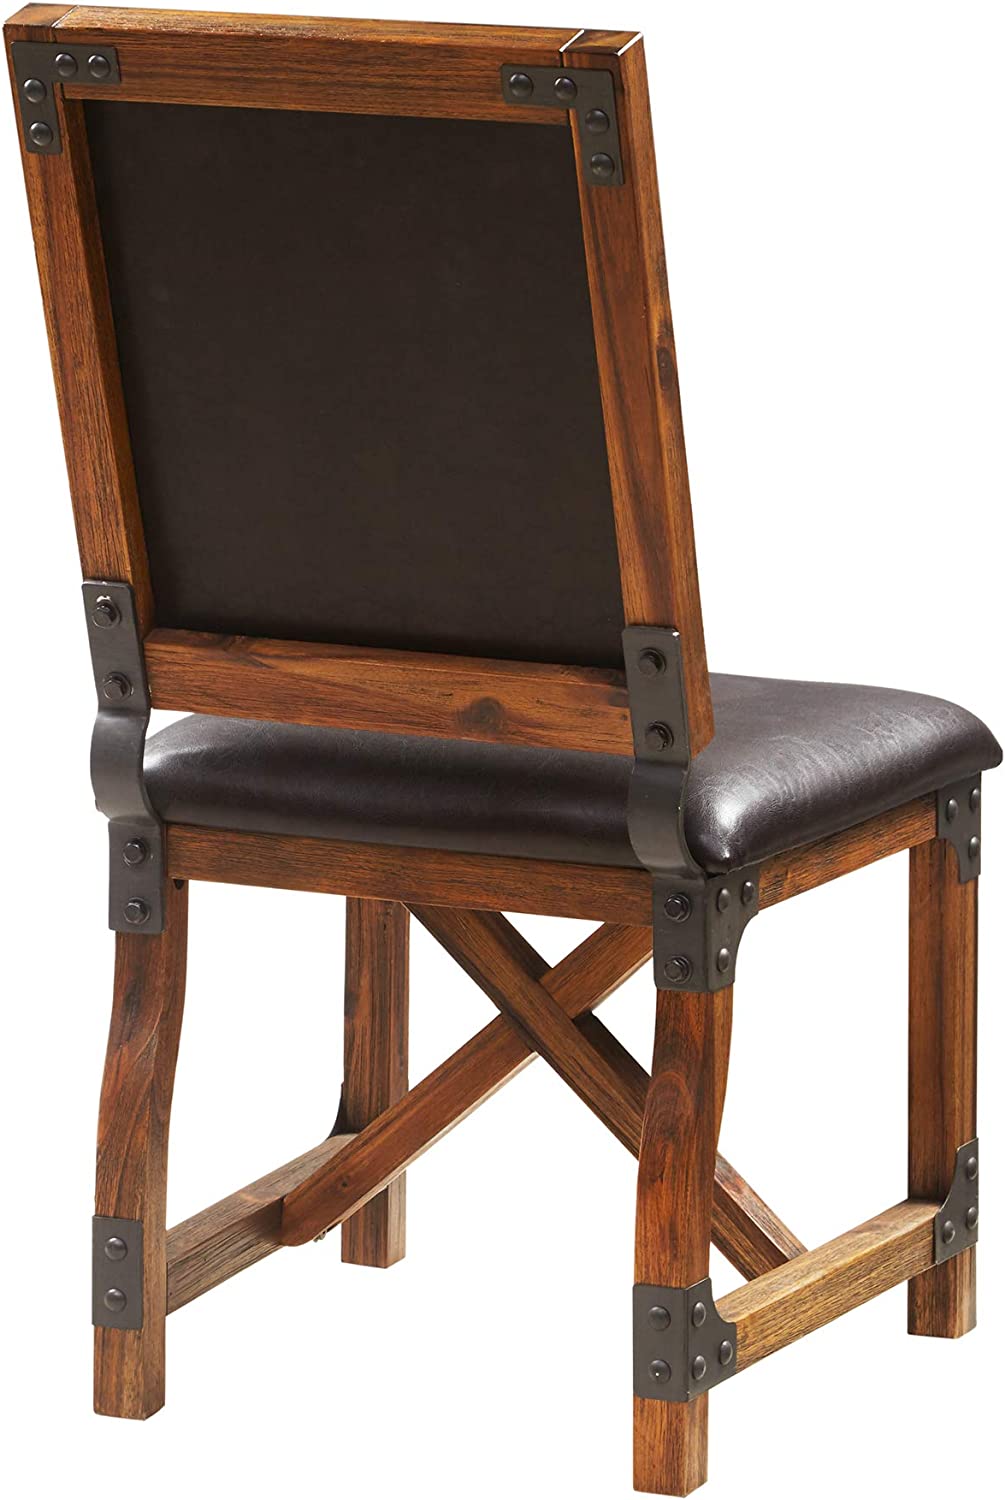 INK+IVY Lancaster Dining Chairs - Solid Wood, Metal Kitchen Stool with Back Rest - Amber Wood, PU Cover Industrial Style Stools - 1 PC Dinner Furniture, Chocolate, 38.5 inch